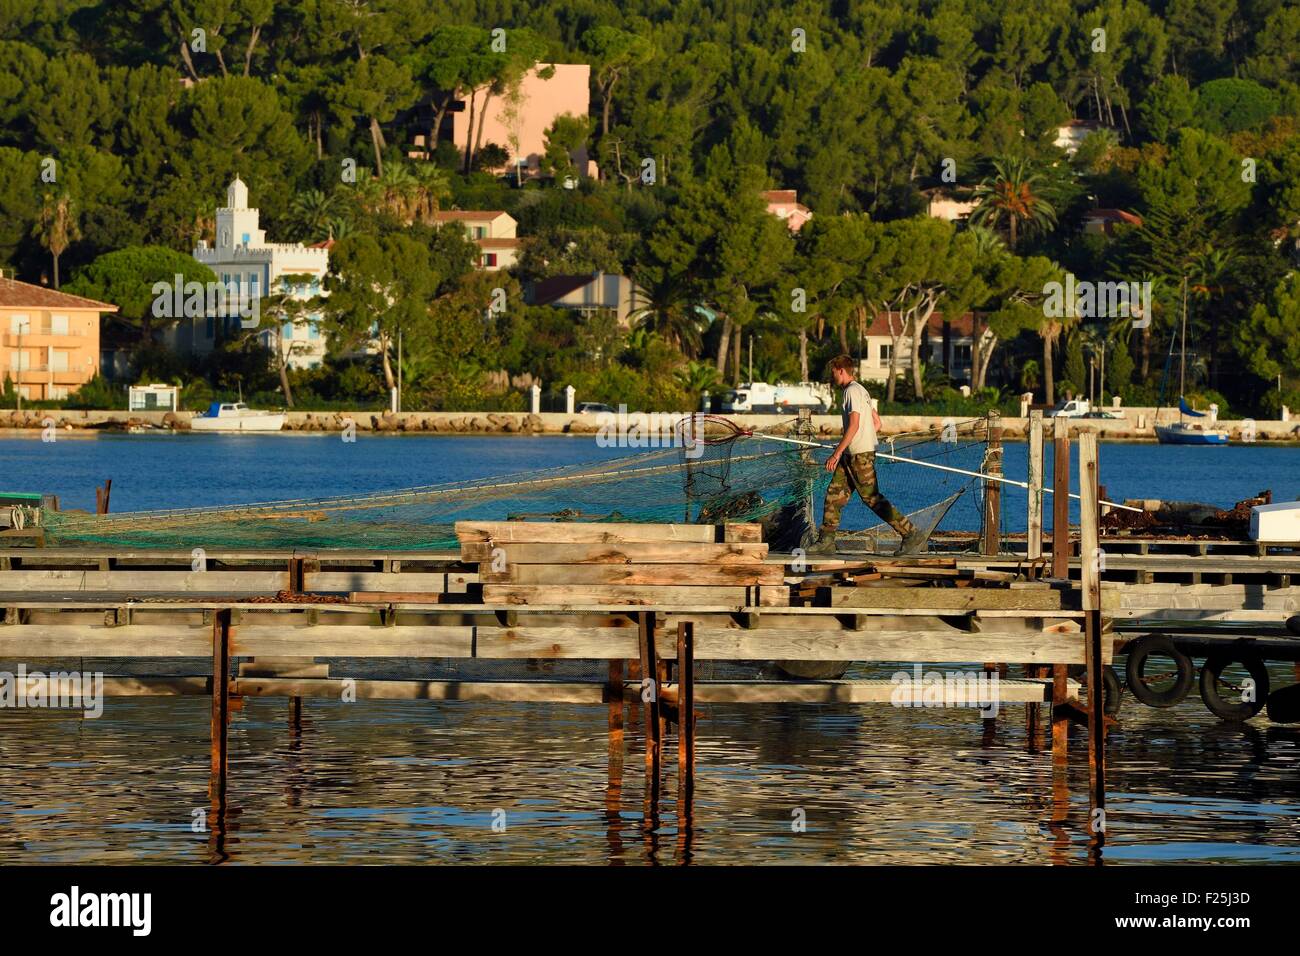 France, Var, the Rade (Roadstead) of Toulon, La Seyne-sur-Mer, mussels and oysters Park, aquaculture farm Stock Photo